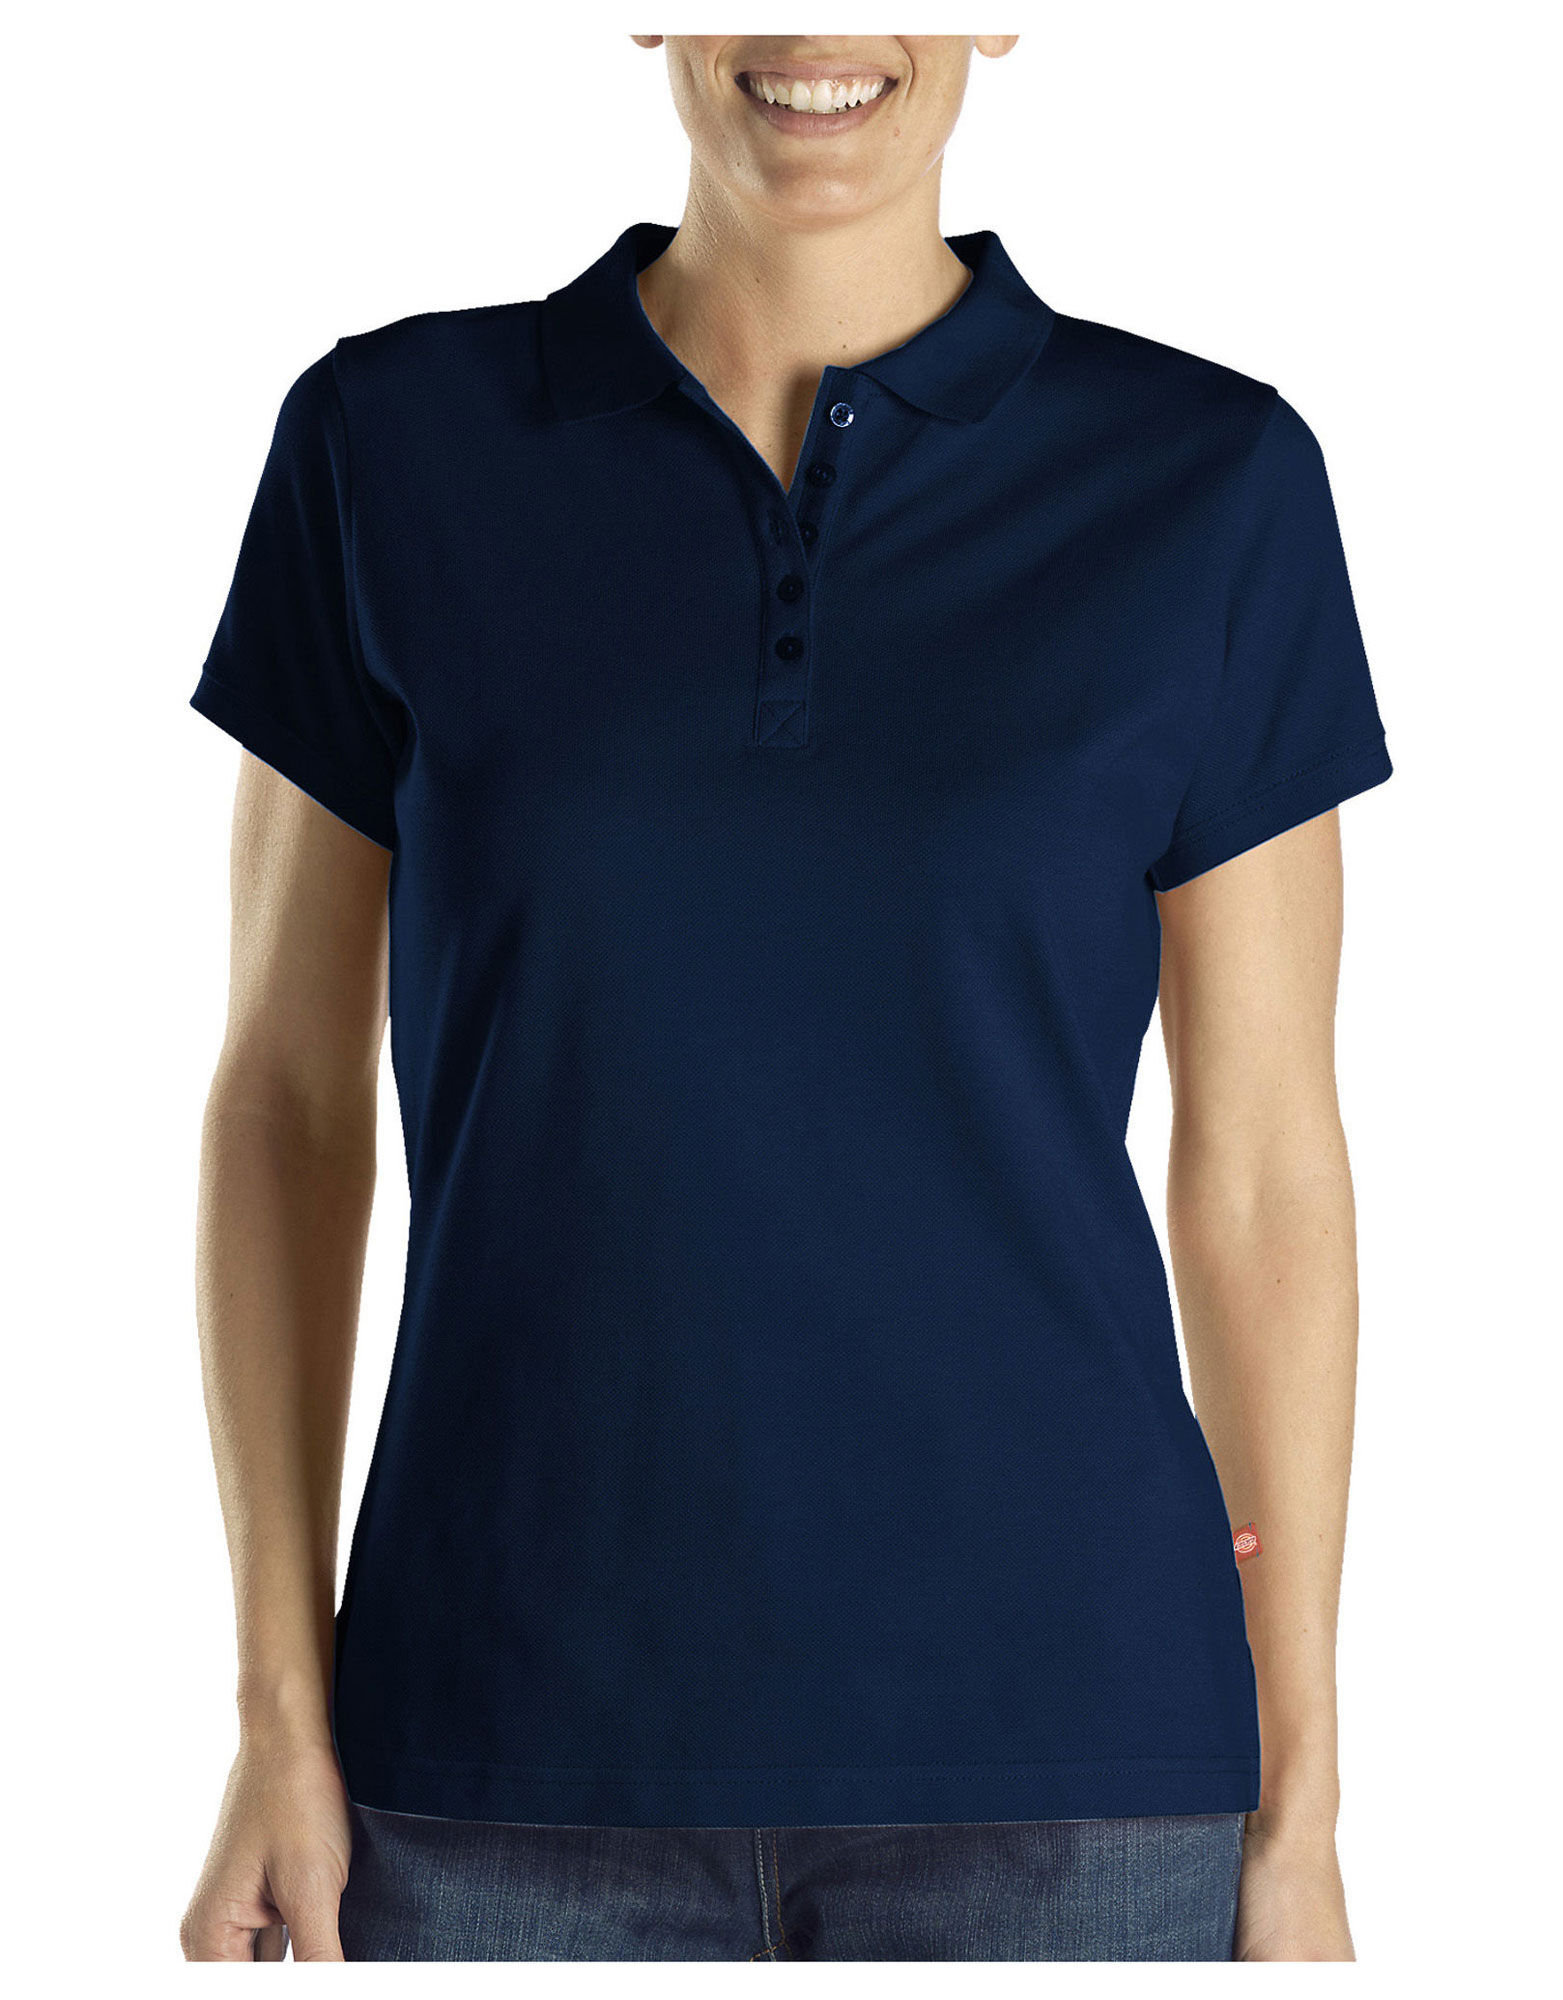 Women's Solid Polo Work Shirts | Dickies